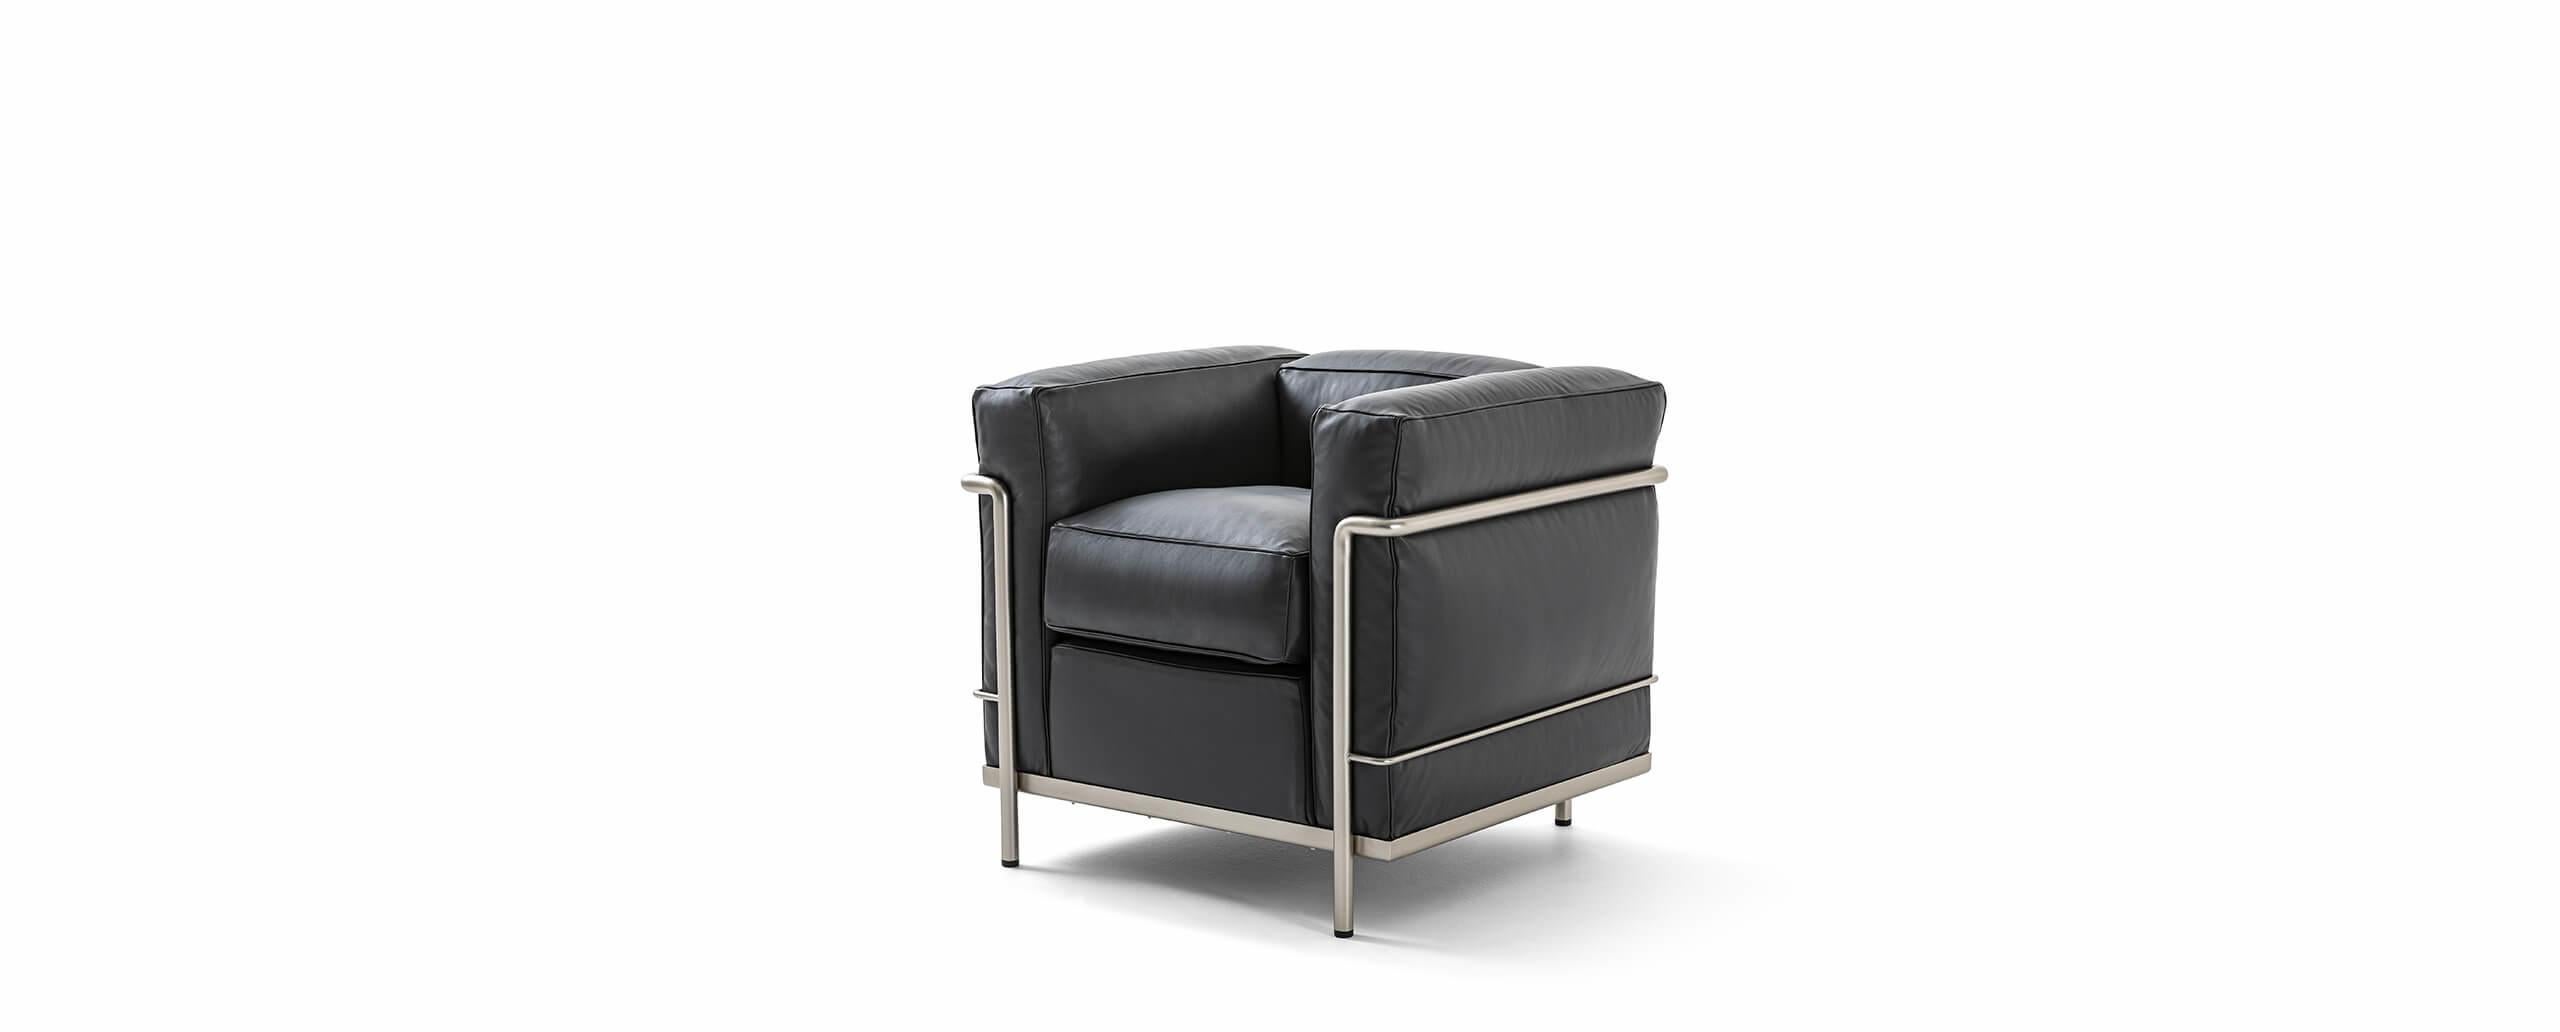 Italian Le Corbusier, Jeanneret, Charlotte Perriand LC3 Fauteuil by Cassina